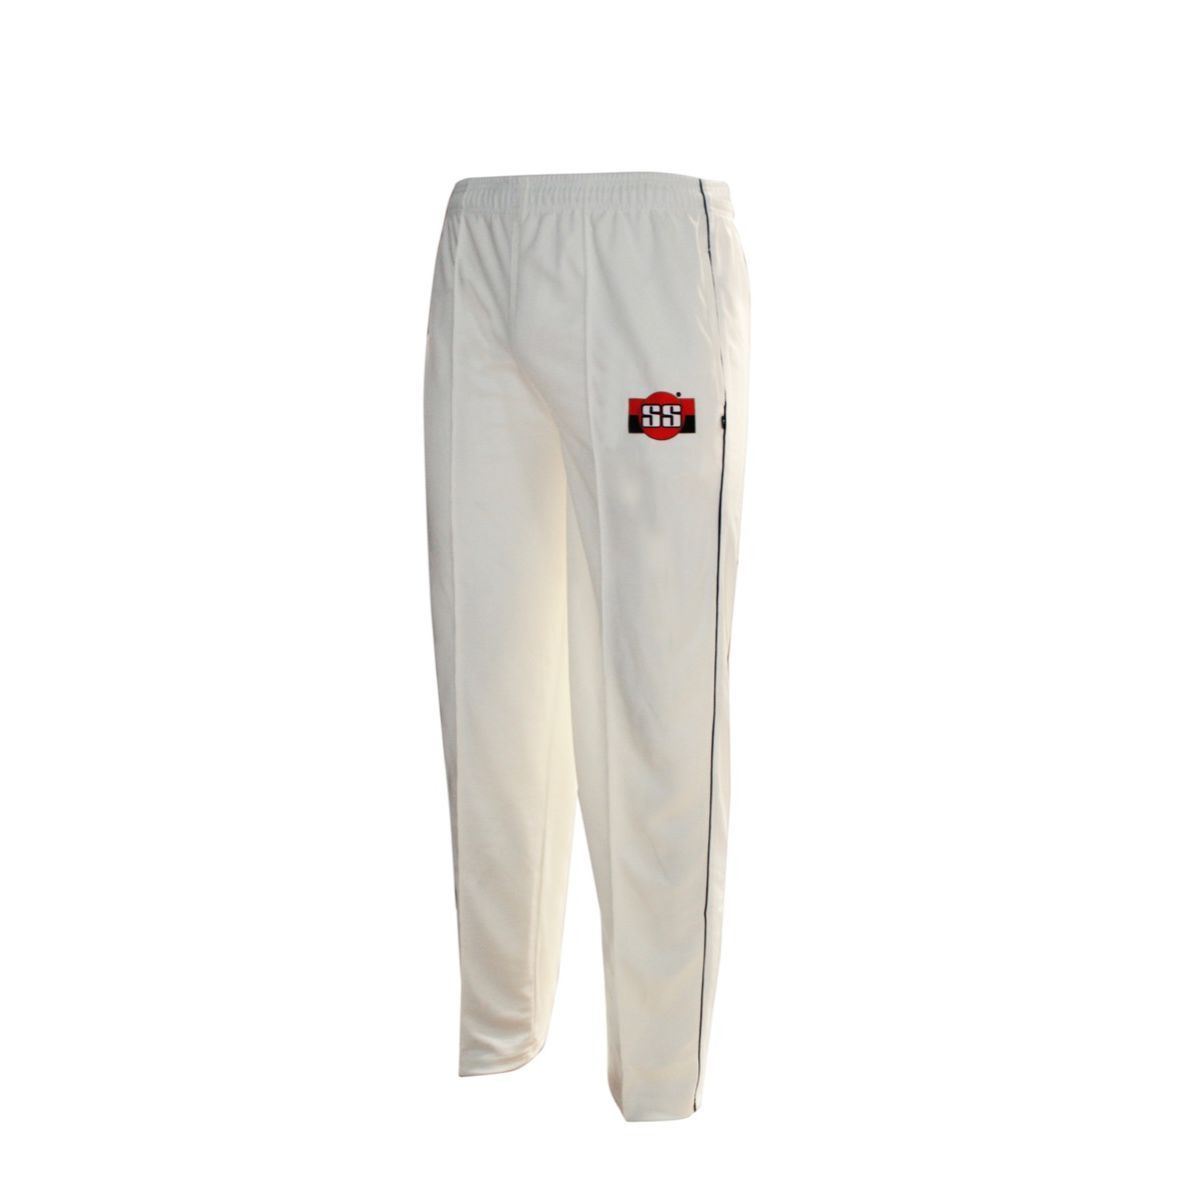 Shorts Pants Public Relations, Cricket Clothing And Equipment, white,  public Relations, active Shorts png | PNGWing